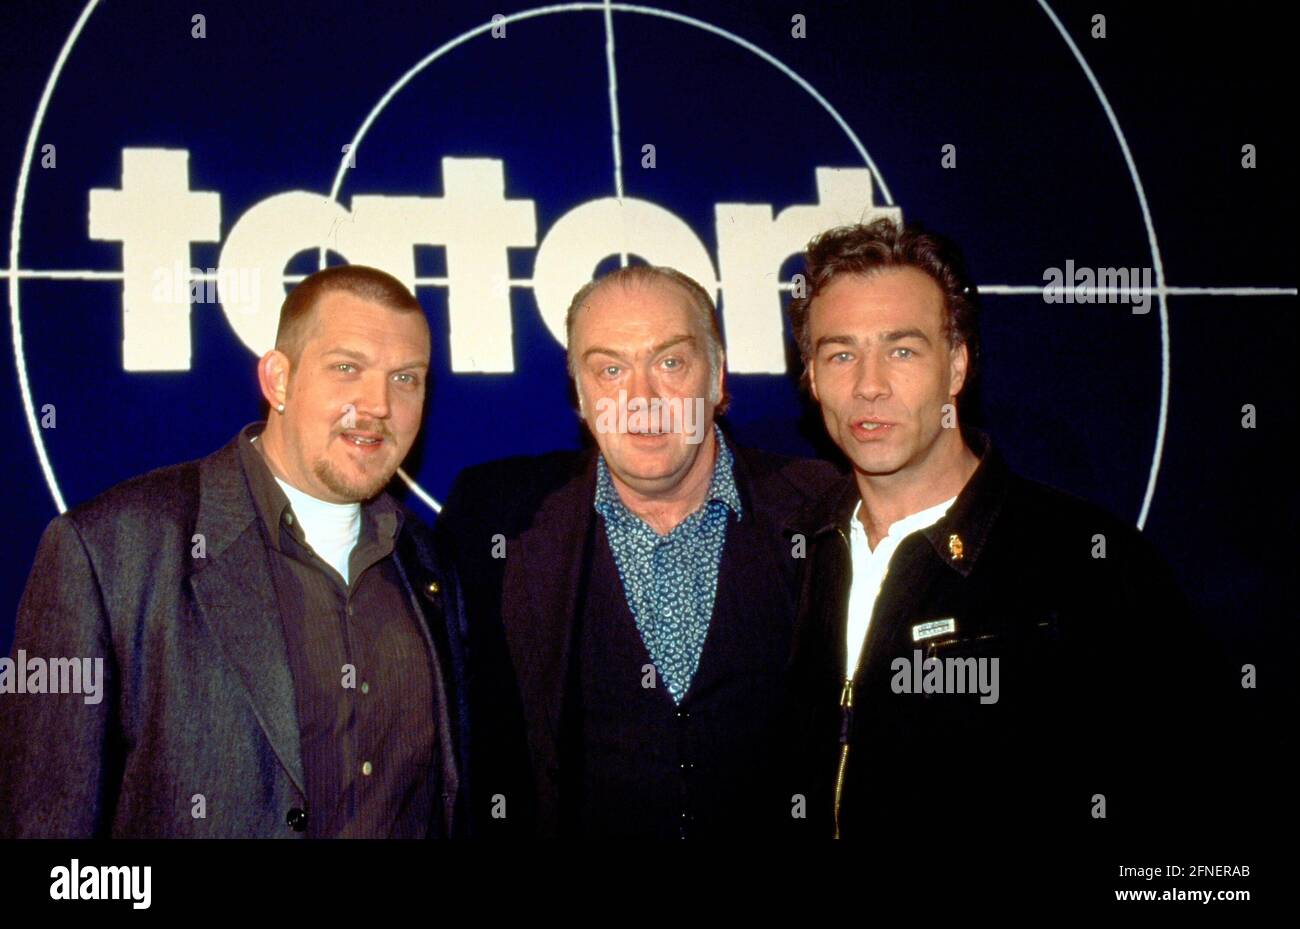 'The ''Tatort'' commissioners and actors Dietmar Bär, Martin Lüttge and Klaus J. Behrendt (from left). [automated translation]' Stock Photo